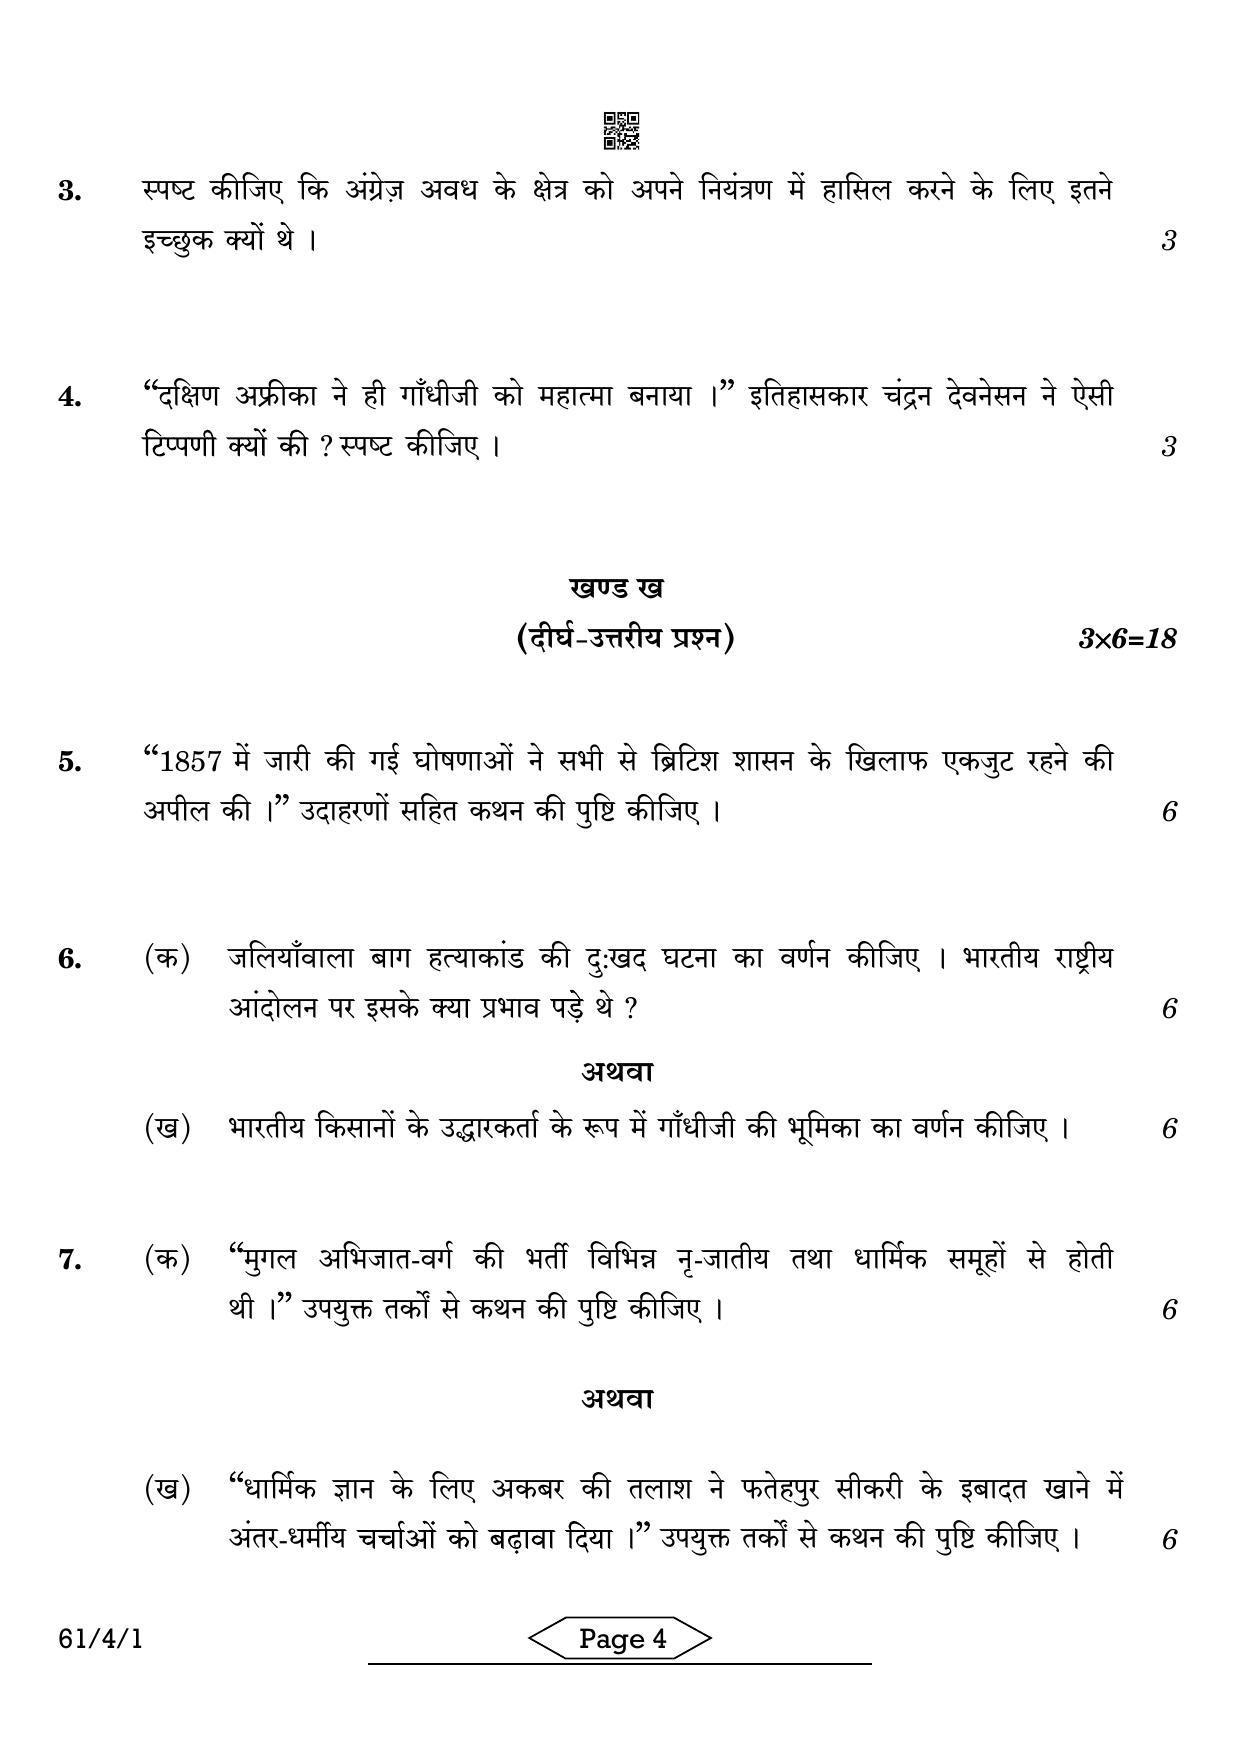 CBSE Class 12 61-4-1 History 2022 Question Paper - Page 4